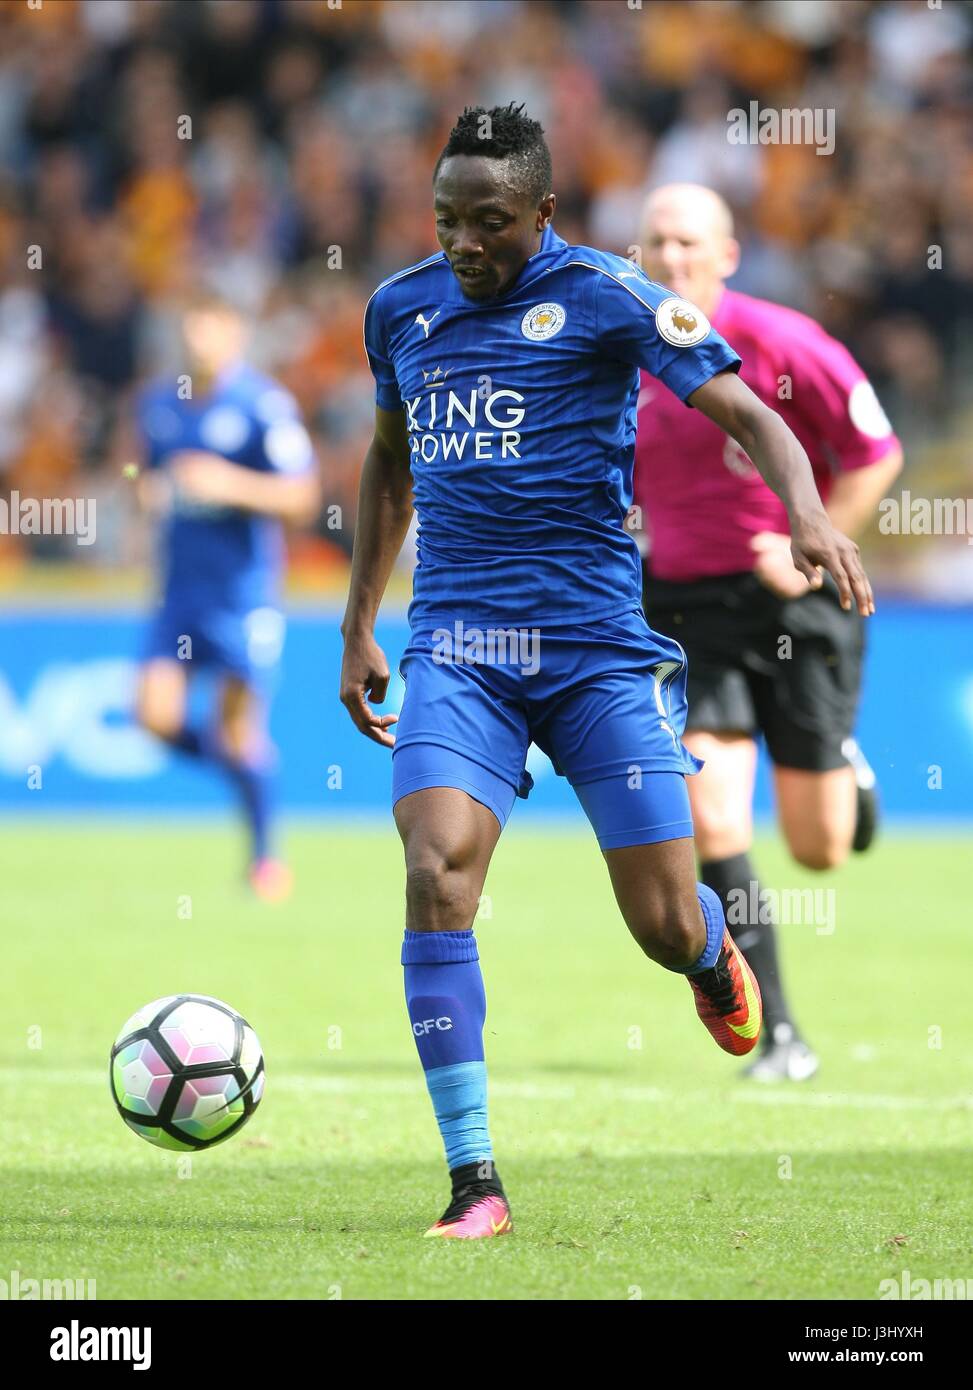 AHMED MUSA LEICESTER CITY FC LEICESTER CITY FC KC STADIUM HULL ENGLAND 13 August 2016 Stock Photo